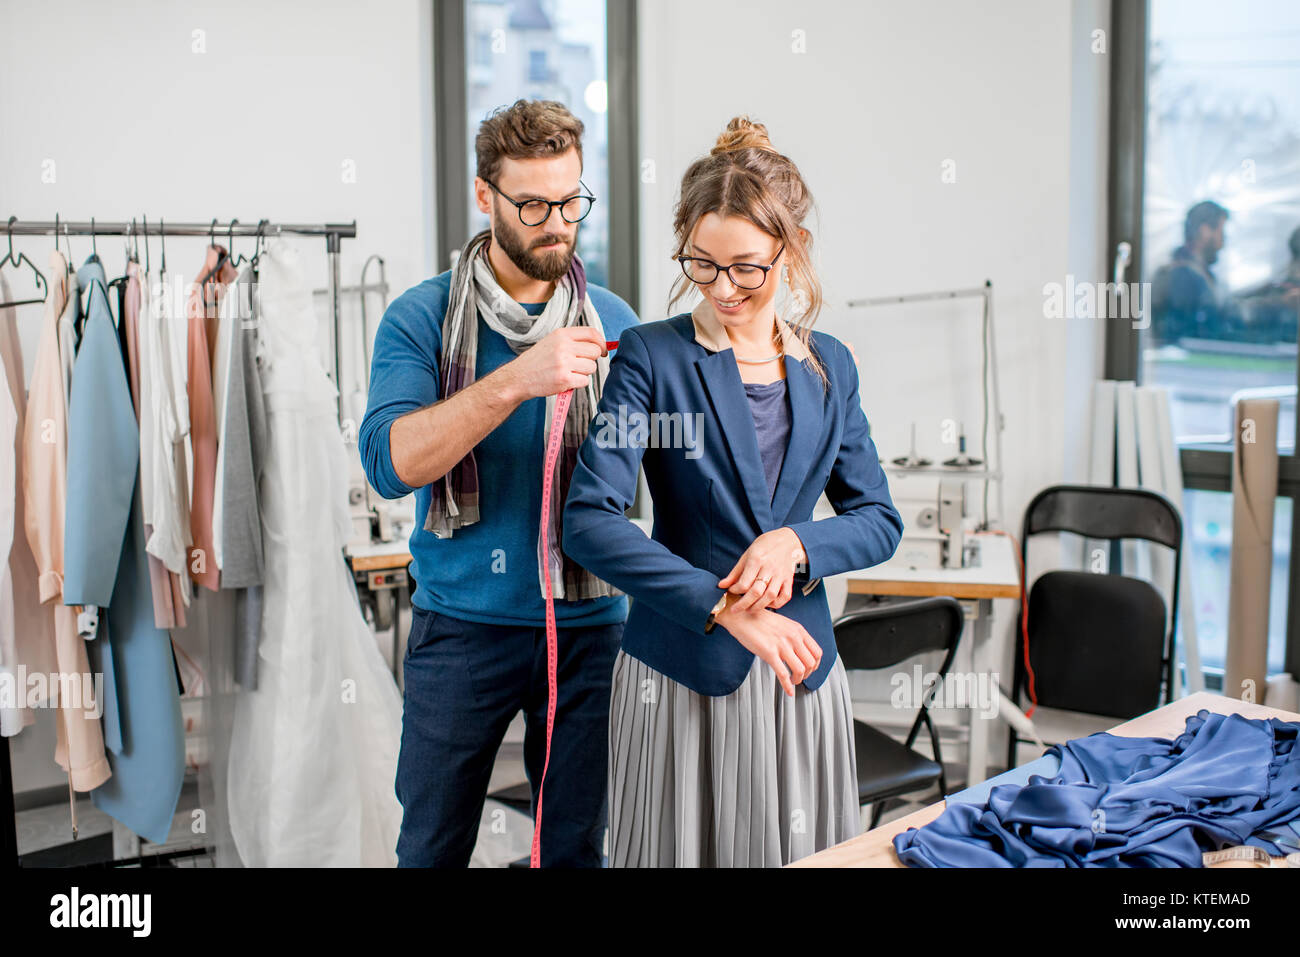 https://c8.alamy.com/comp/KTEMAD/handsome-tailor-measuring-jacket-on-the-woman-client-standing-at-the-KTEMAD.jpg